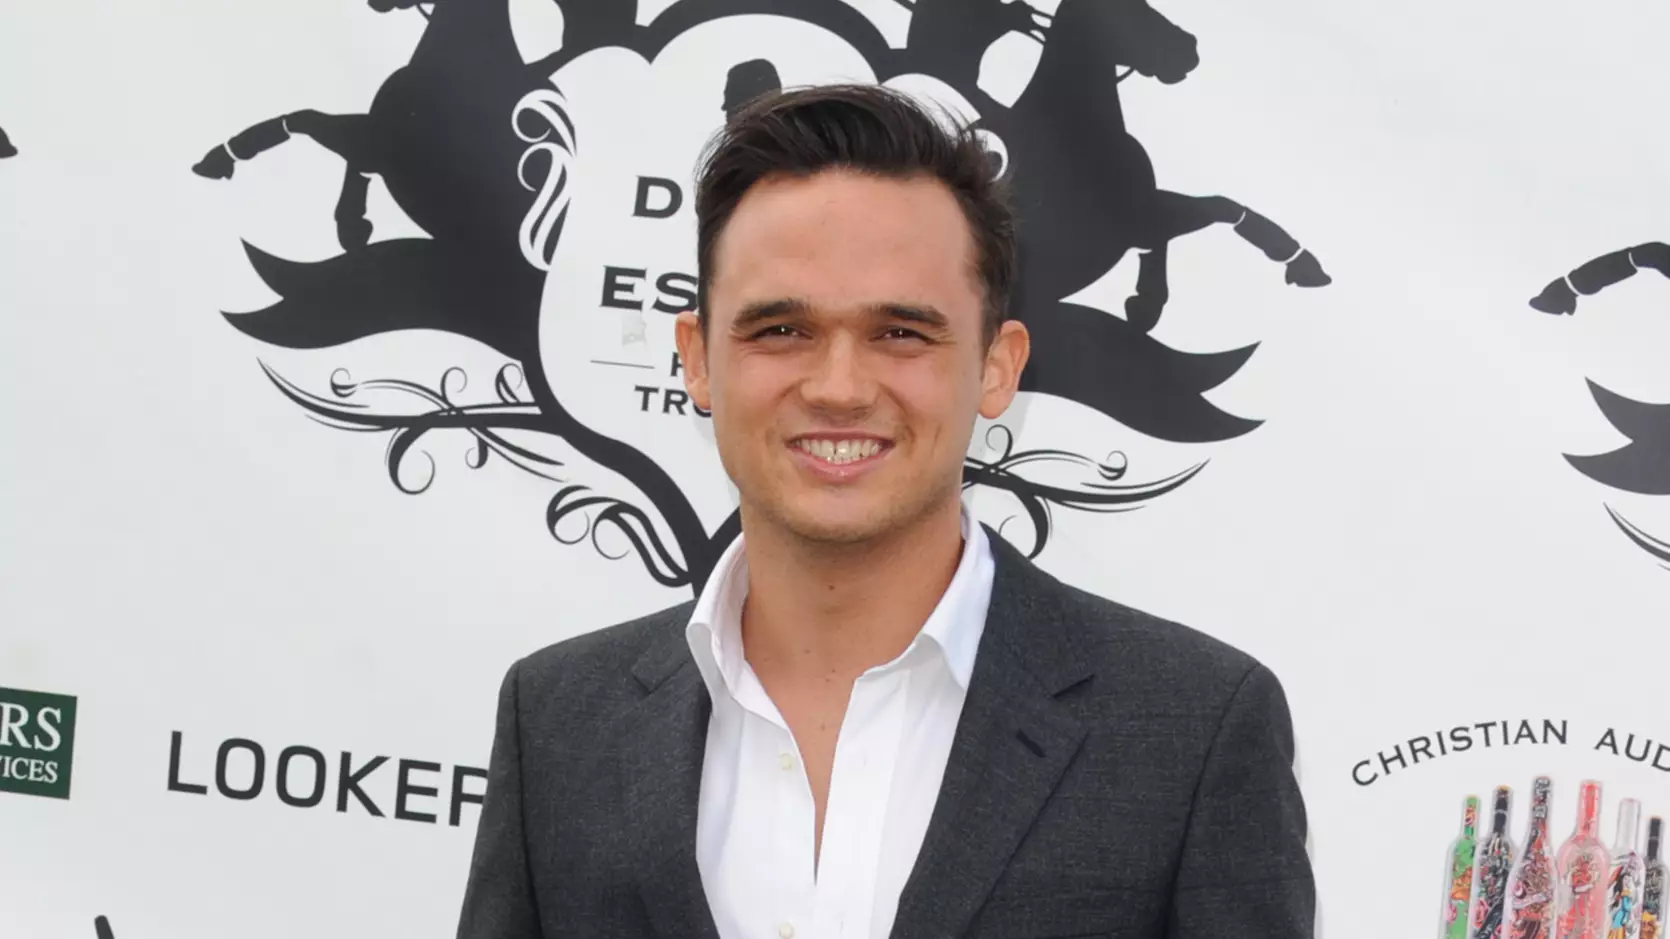 Gareth Gates Lost £250,000 After Investing In Forex Trading 